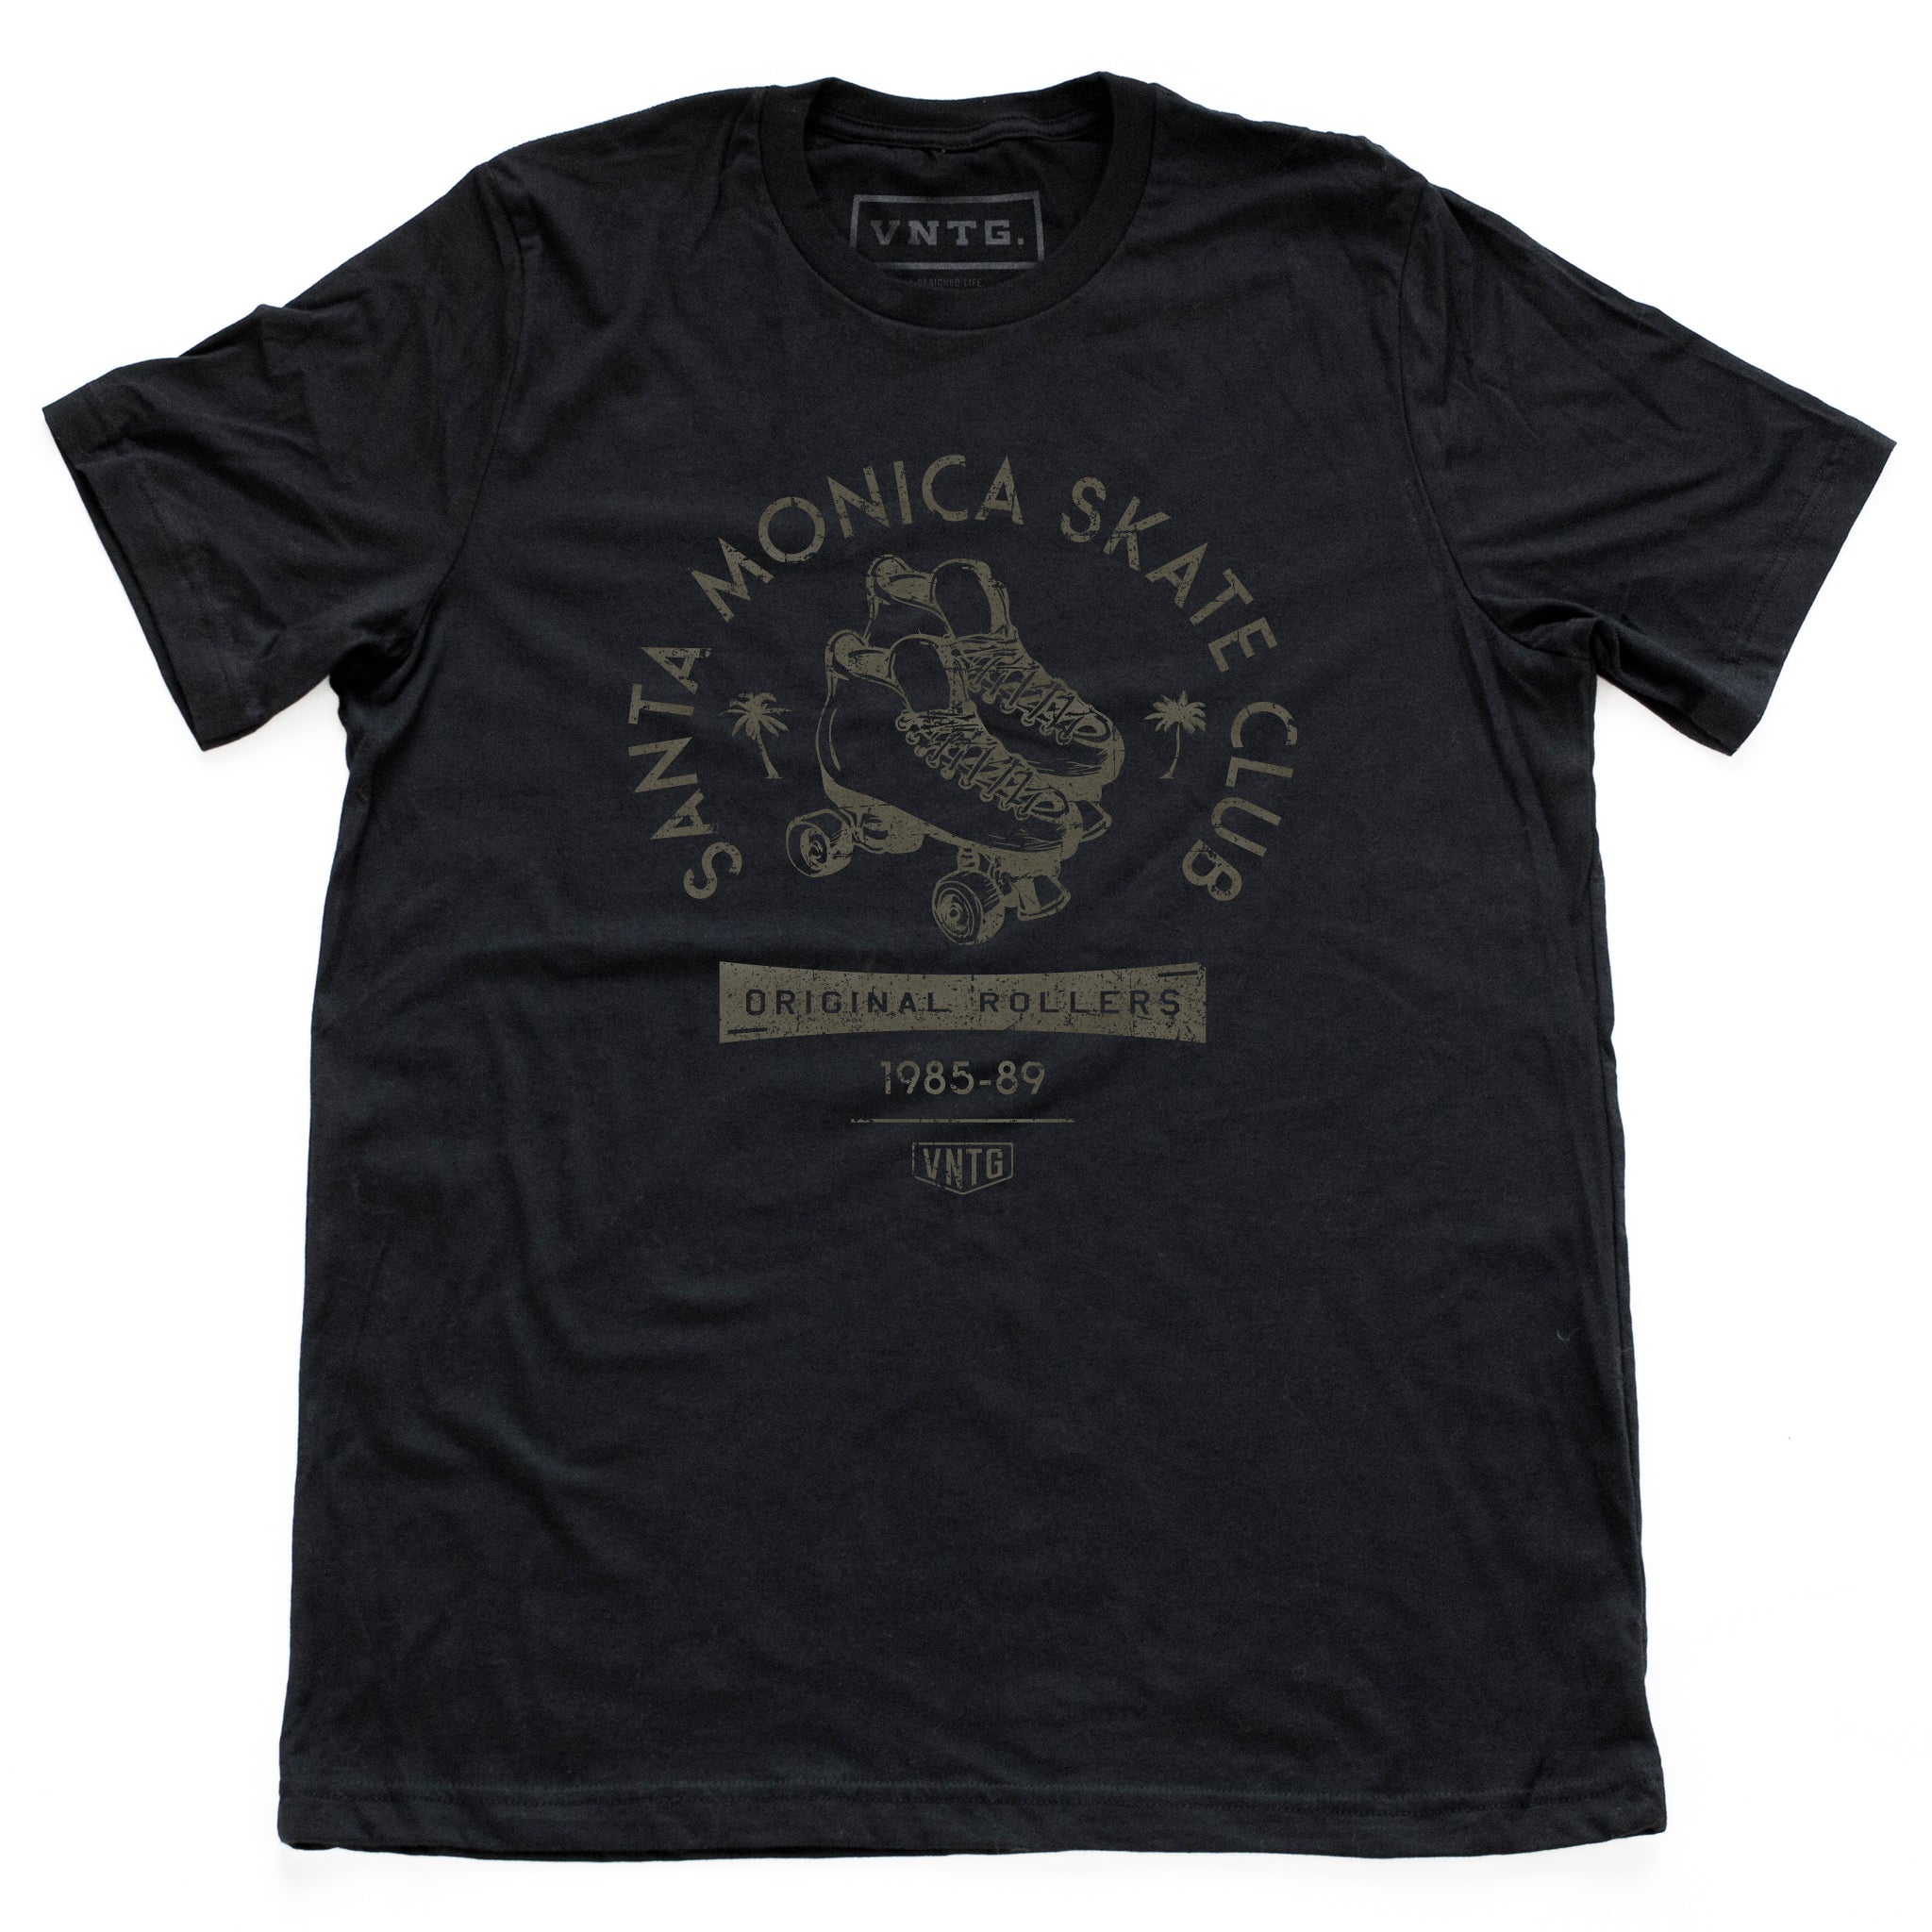 A vintage-inspired retro t-shirt in classic Black for the fictitious Santa Monica Skate Club, “original rollers 1985-89” featuring a pair of quad roller skates and palm trees. By fashion brand VNTG. for Wolfsaint.net